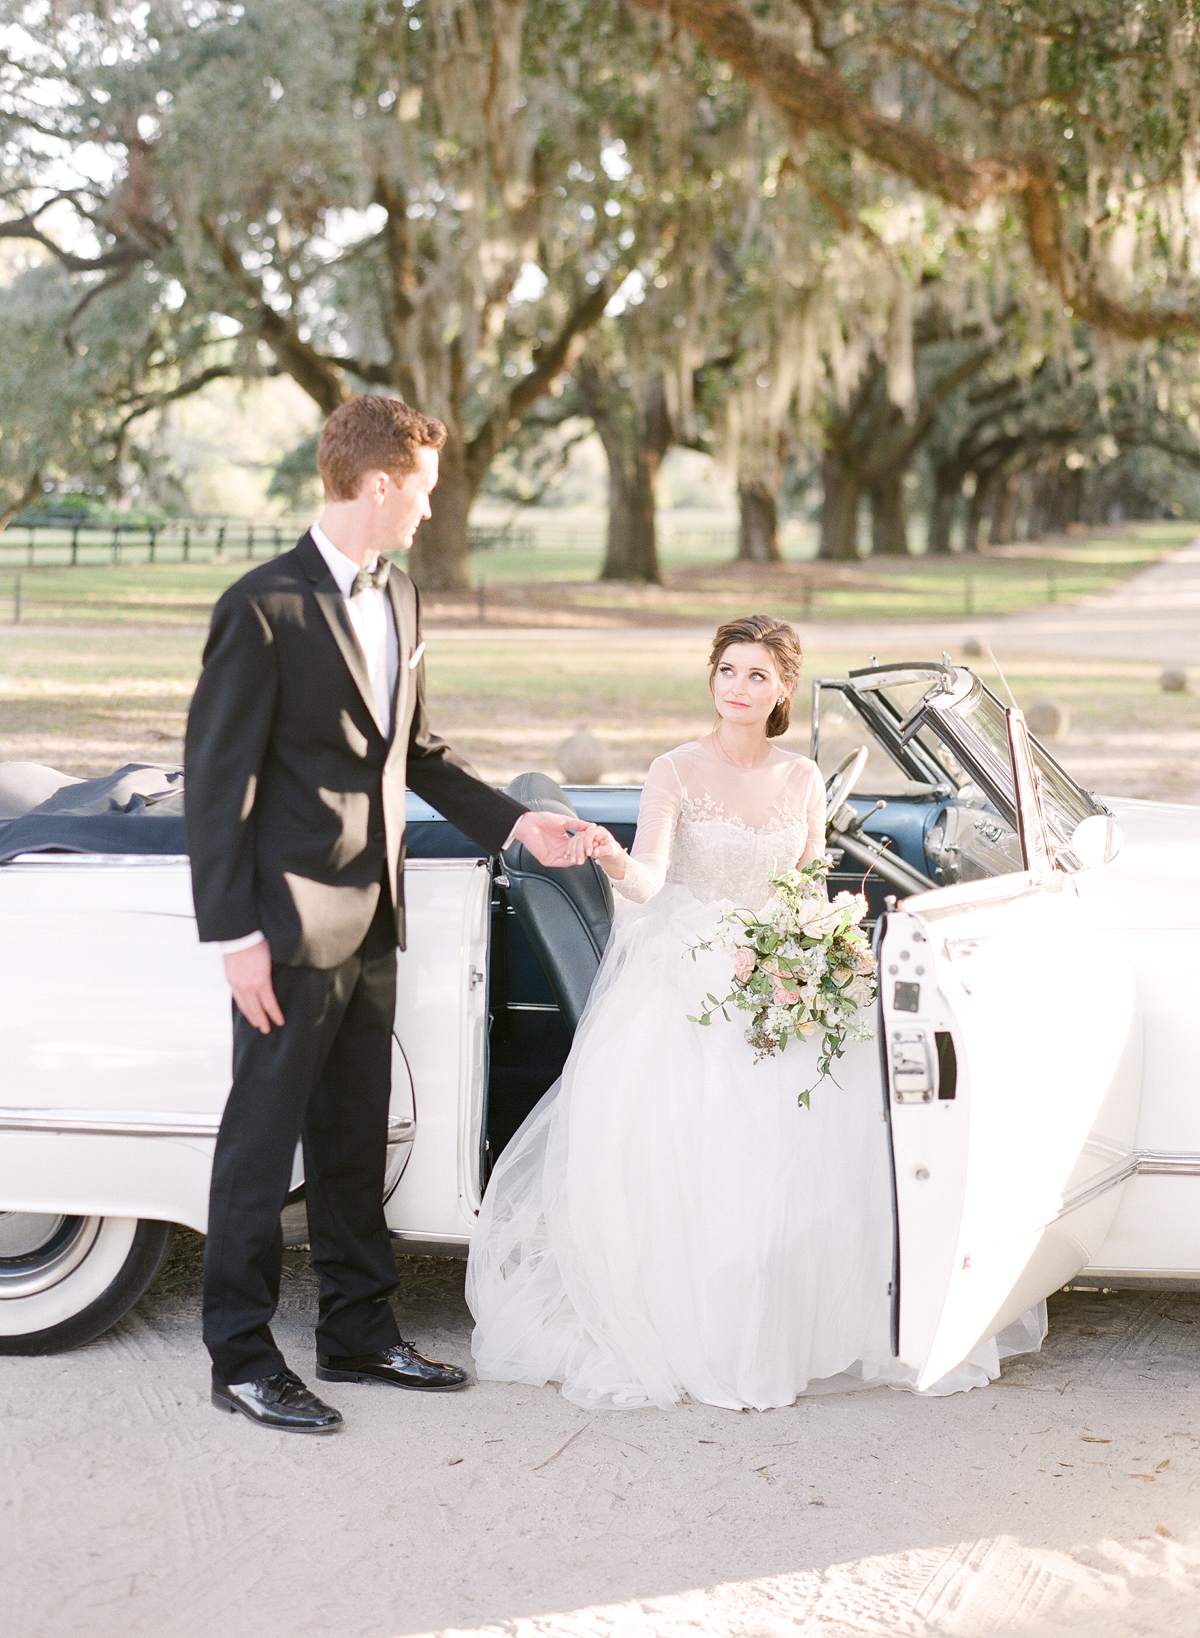 Fine Art Wedding Photographer | Molly Carr Photography | Magnolia Rouge Feature | Boone Hall Wedding | Boone Hall Plantation Wedding Photography | Bride and Groom Getting Out of Vintage Convertible | Groom Helping Bride Out of Car | Wedding Getaway Car | Vintage Getaway Car | Emily Kotarski Wedding Dress